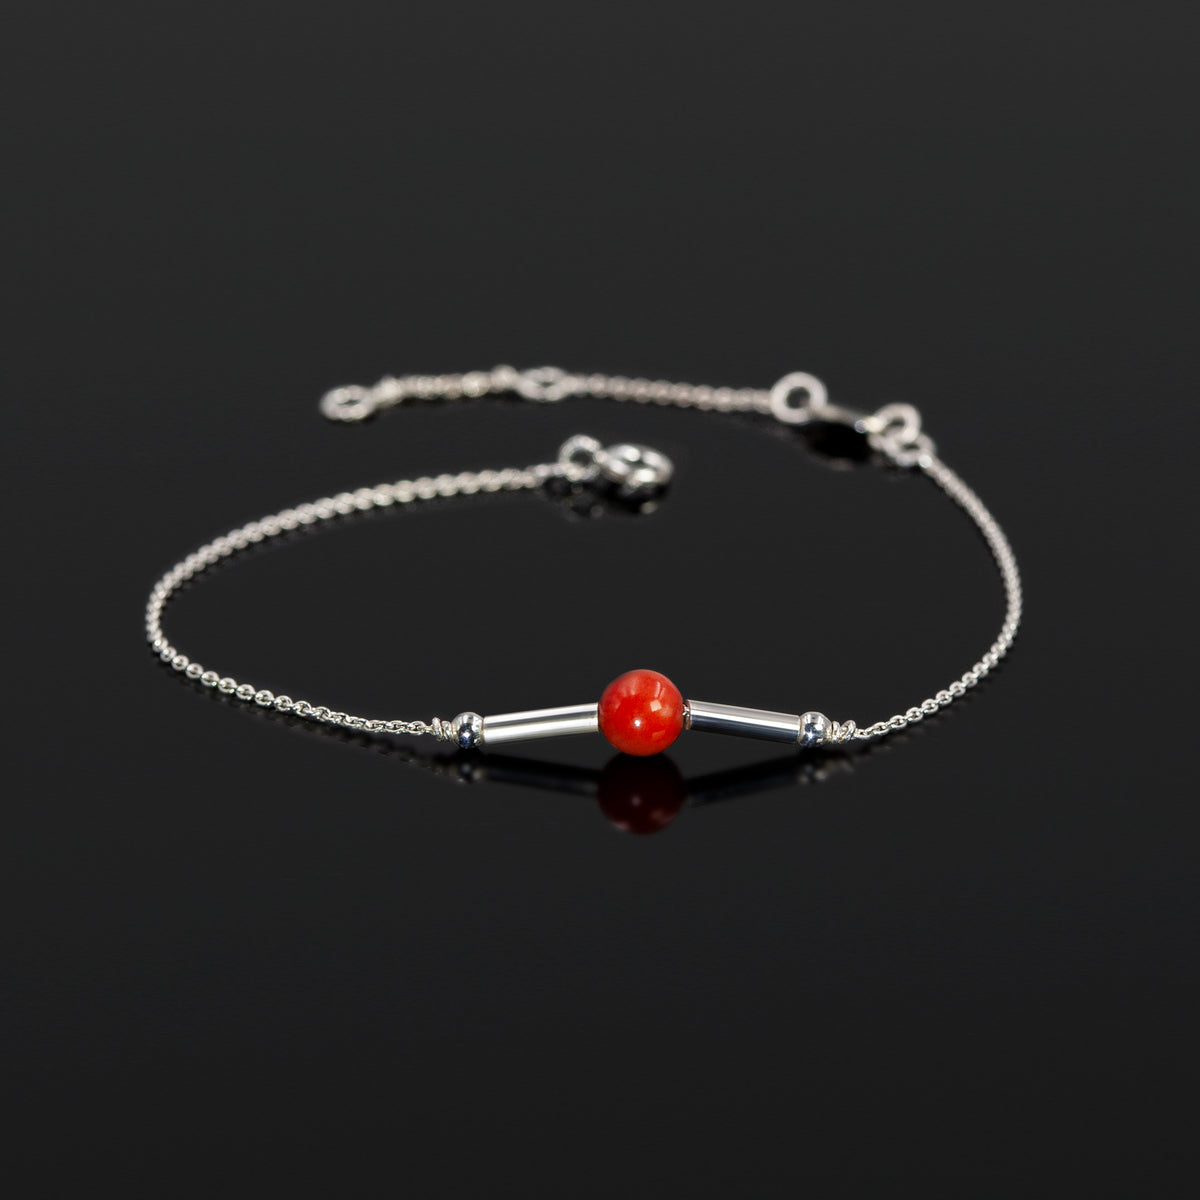 Sterling silver Reef bracelet with coral accent by Rouaida.